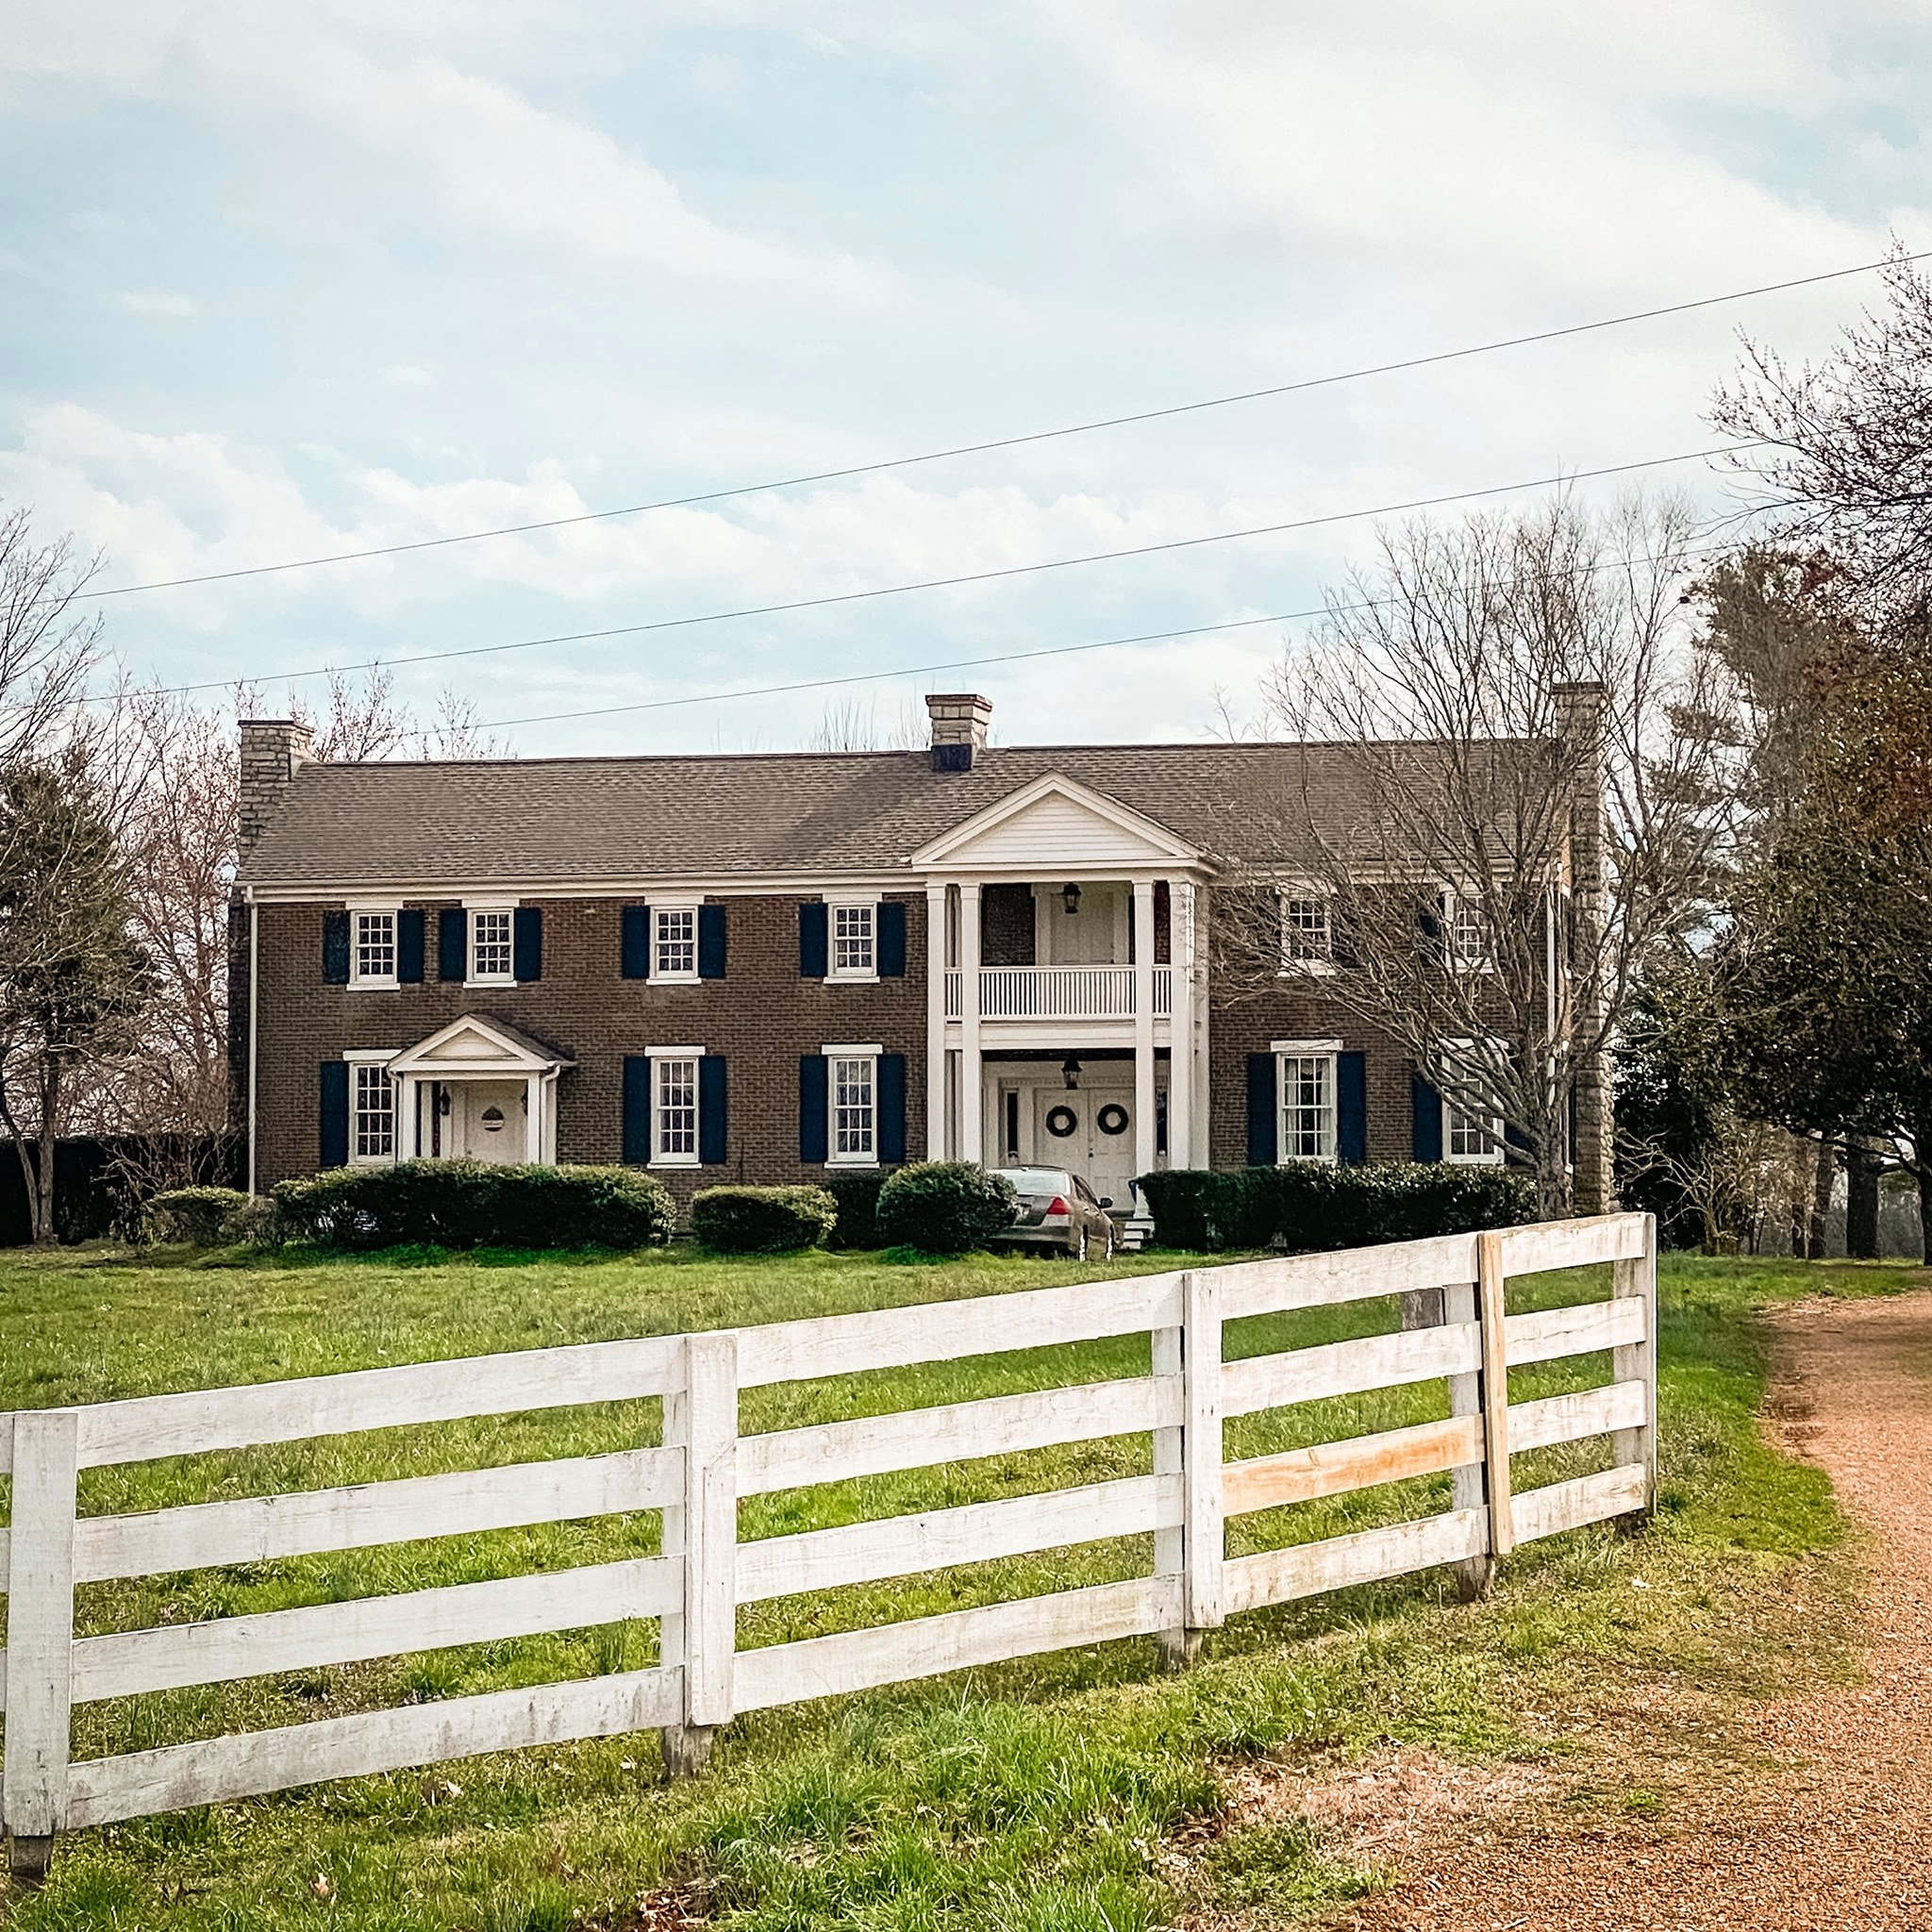 Eagleville Home Dates to 1700s